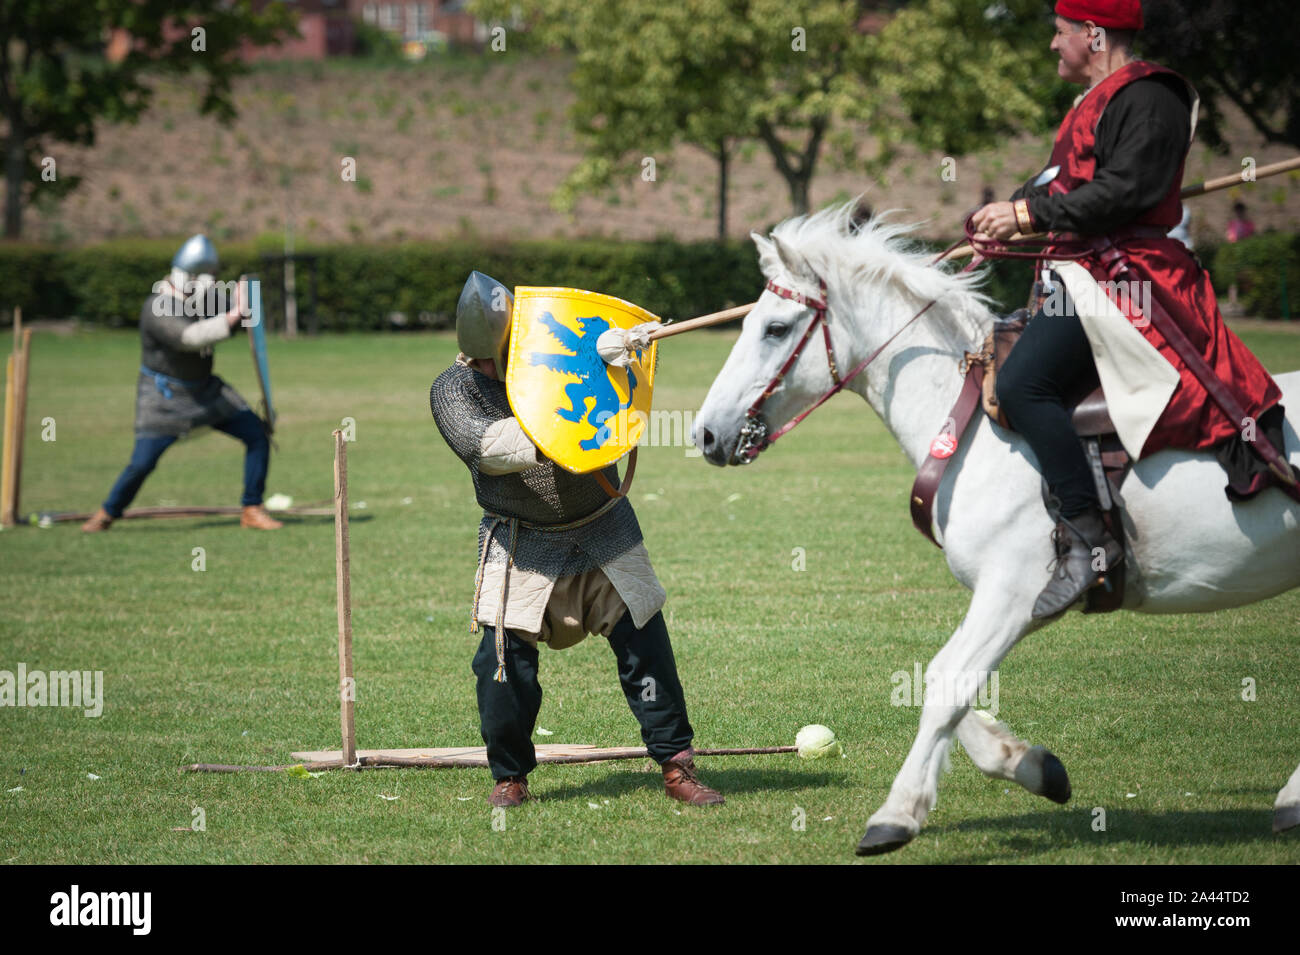 Crown Meadow, Evesham, Worcestershire, UK. 8th August, 2015. Pictured:  Reenactors show off their horsemanship skills at the 750th anniversary of the Stock Photo